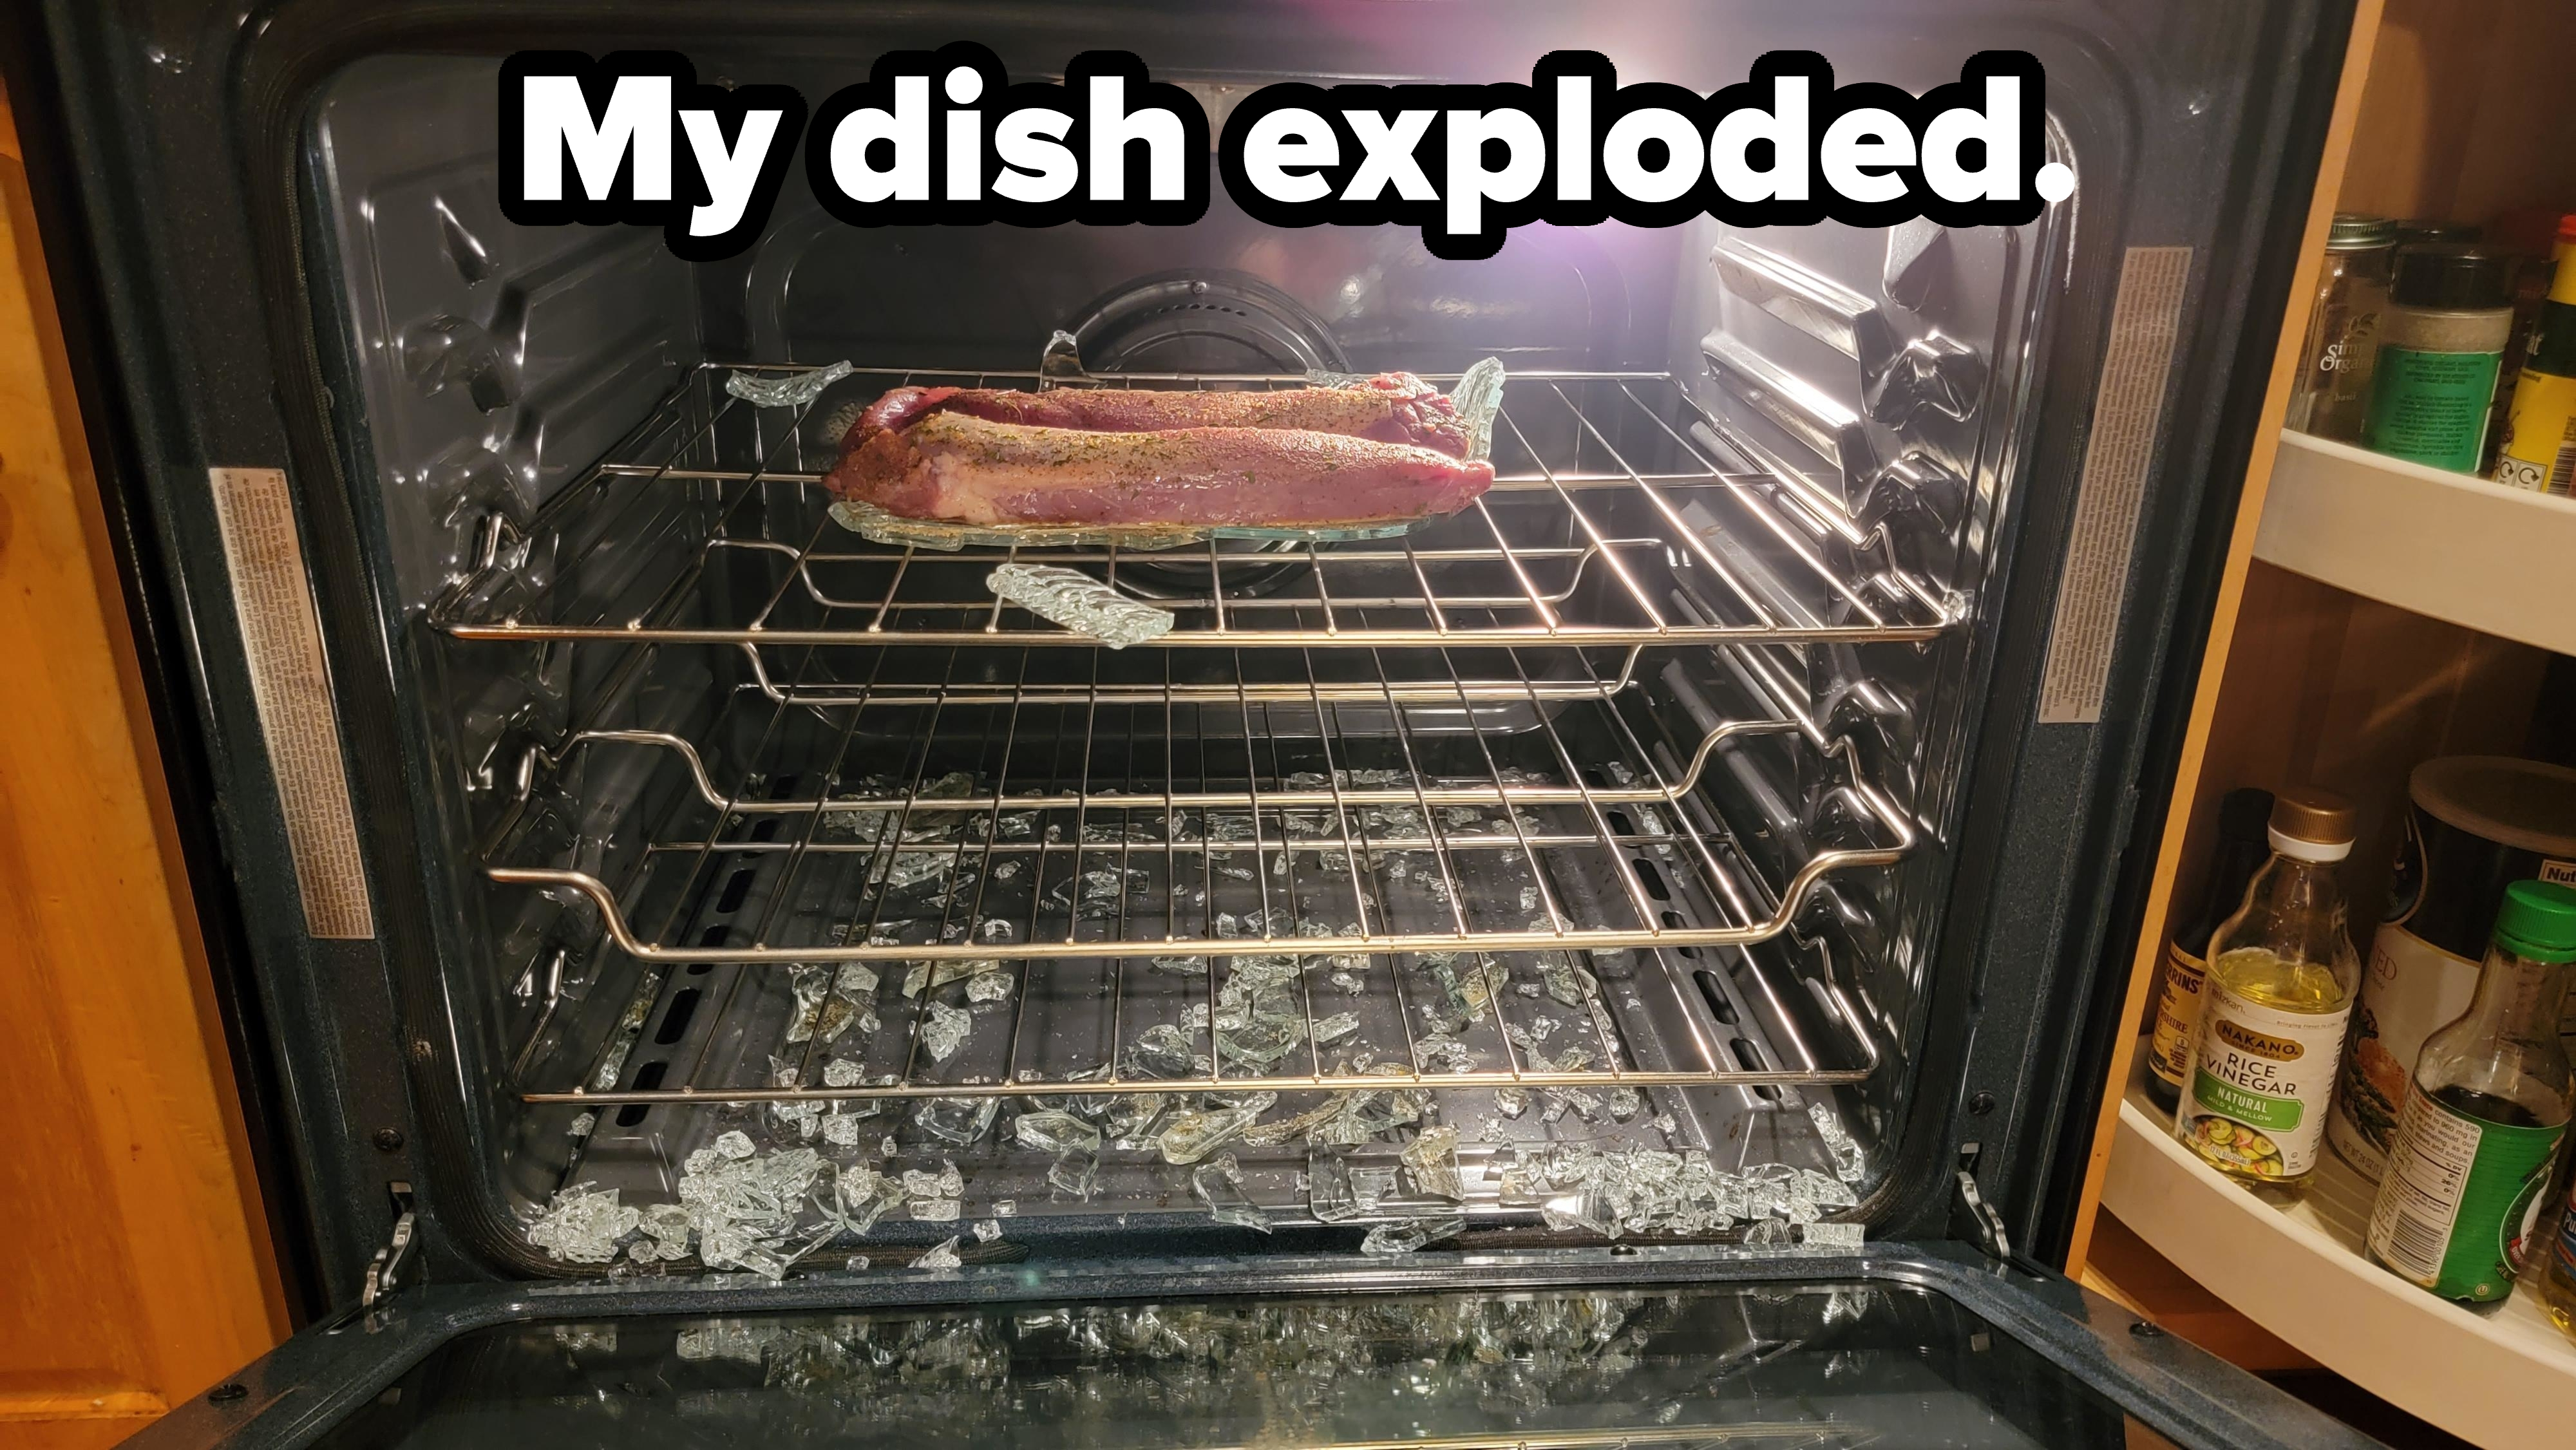 &quot;My dish exploded.&quot;